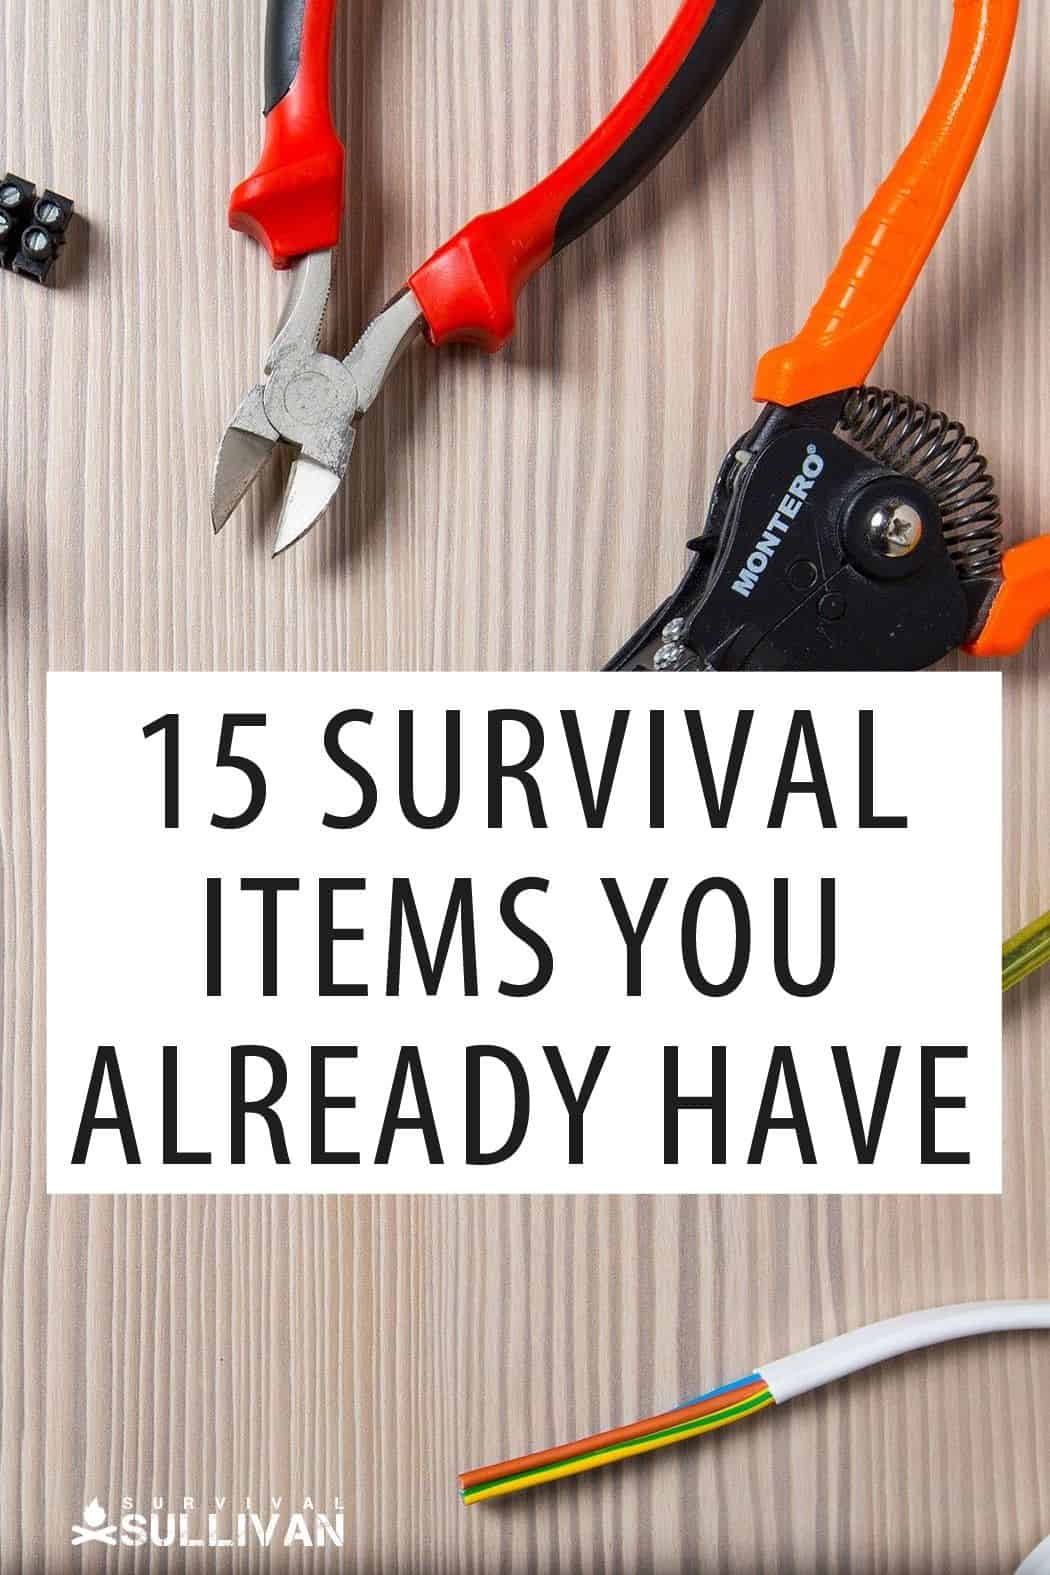 survival gear you already have Pinterest image